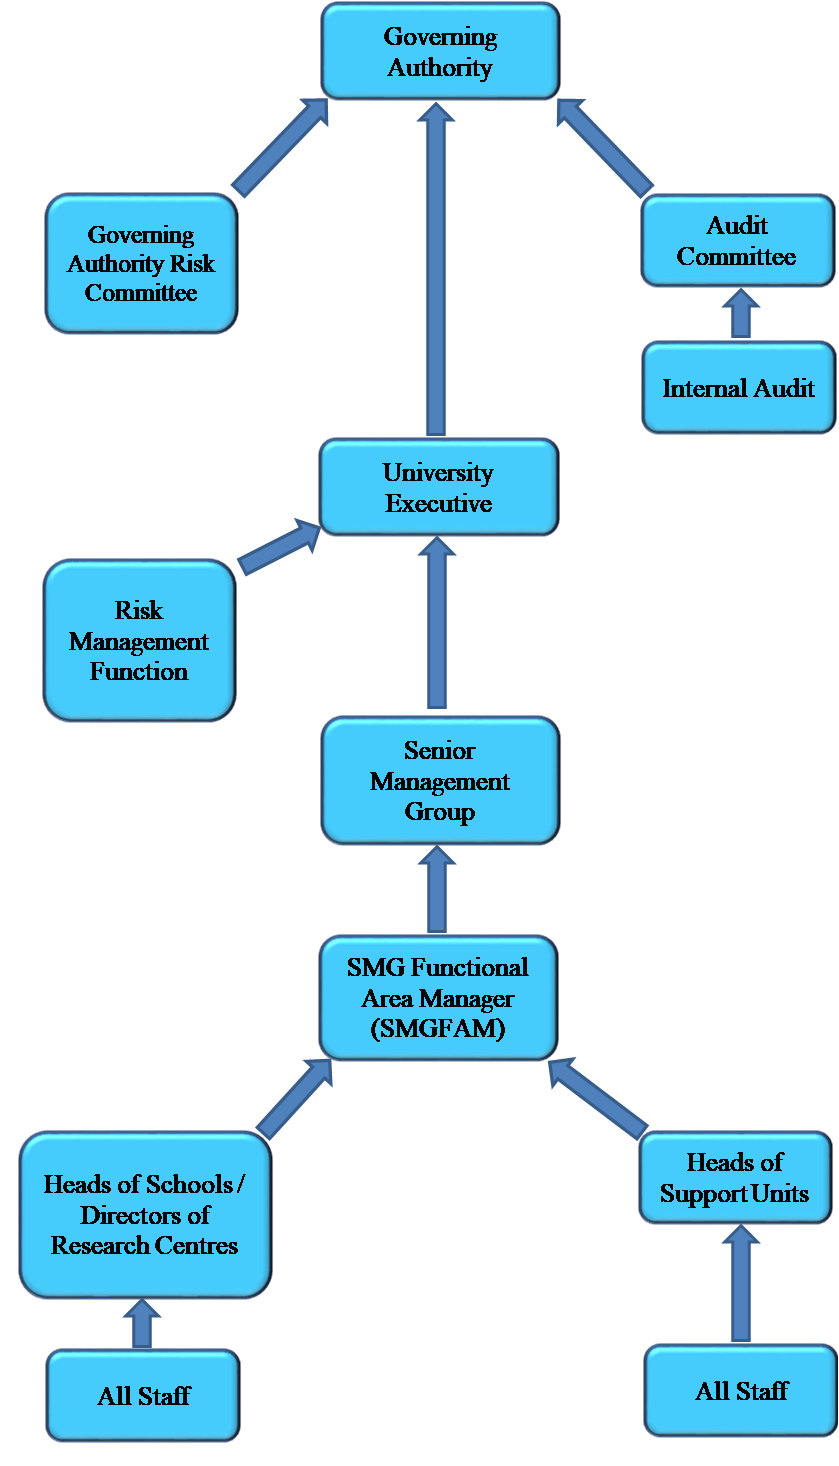 Apx 2 - Overview of Risk Mgt